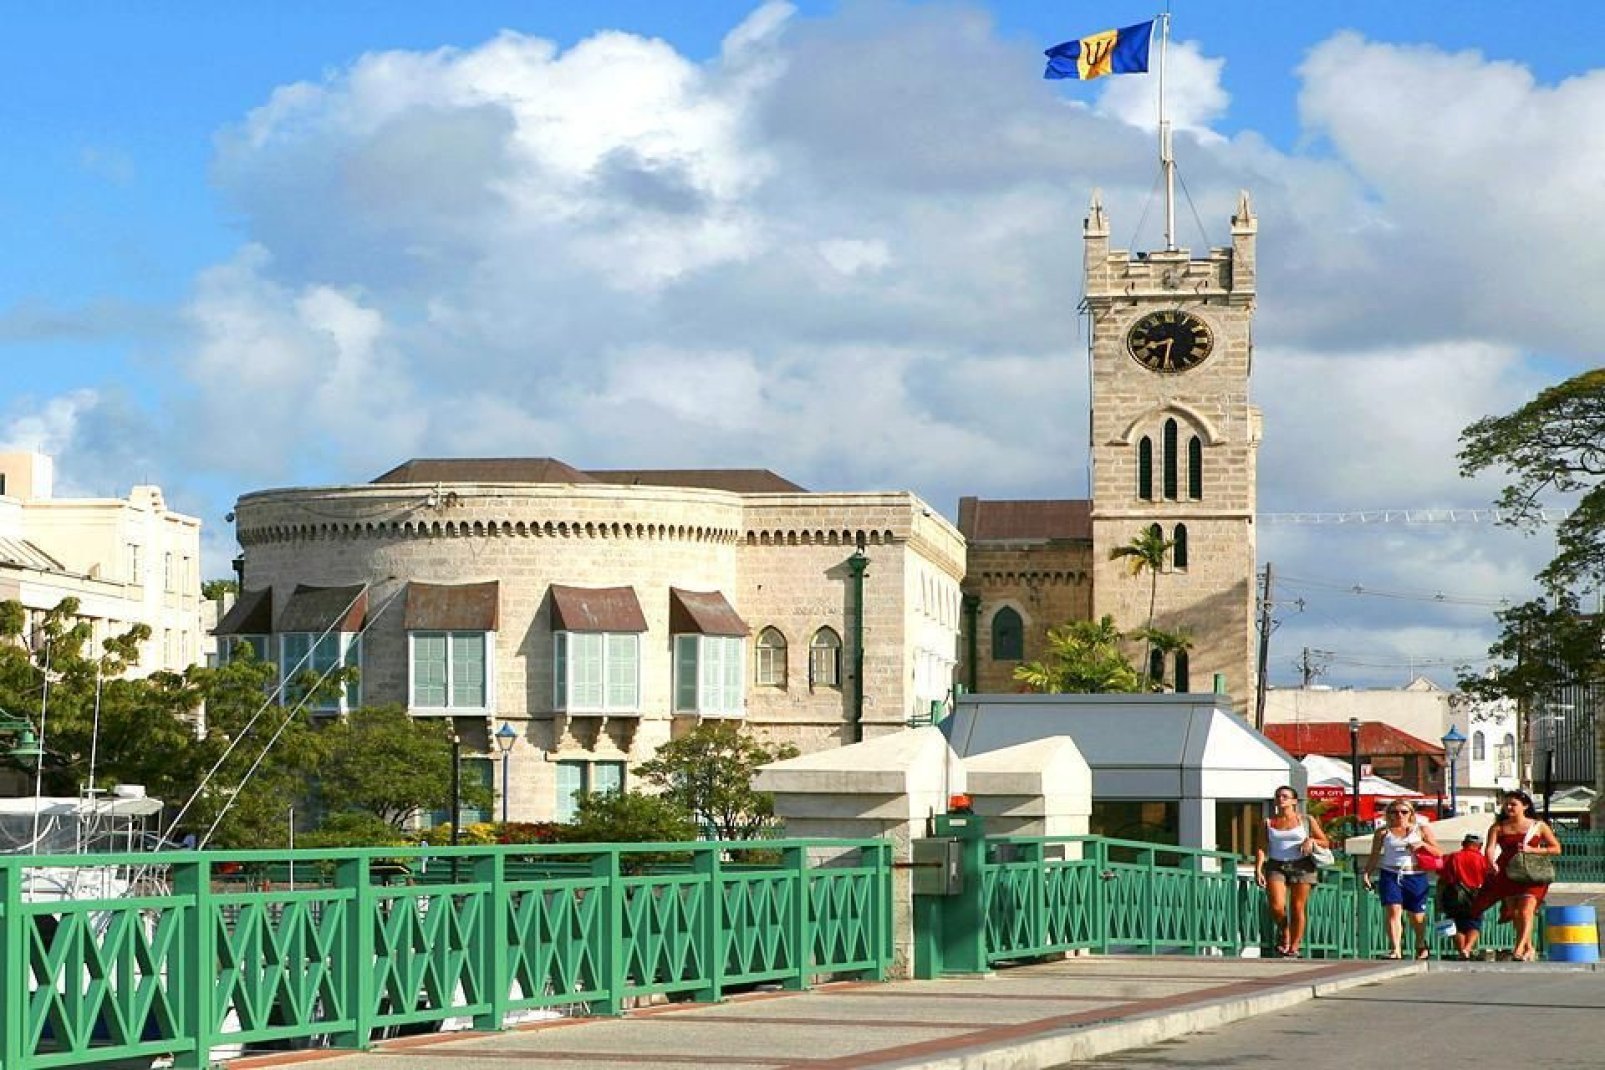 The city centre and its garrison from the time of Britain's Atlantic colonial empire are listed as UNESCO World Heritage.